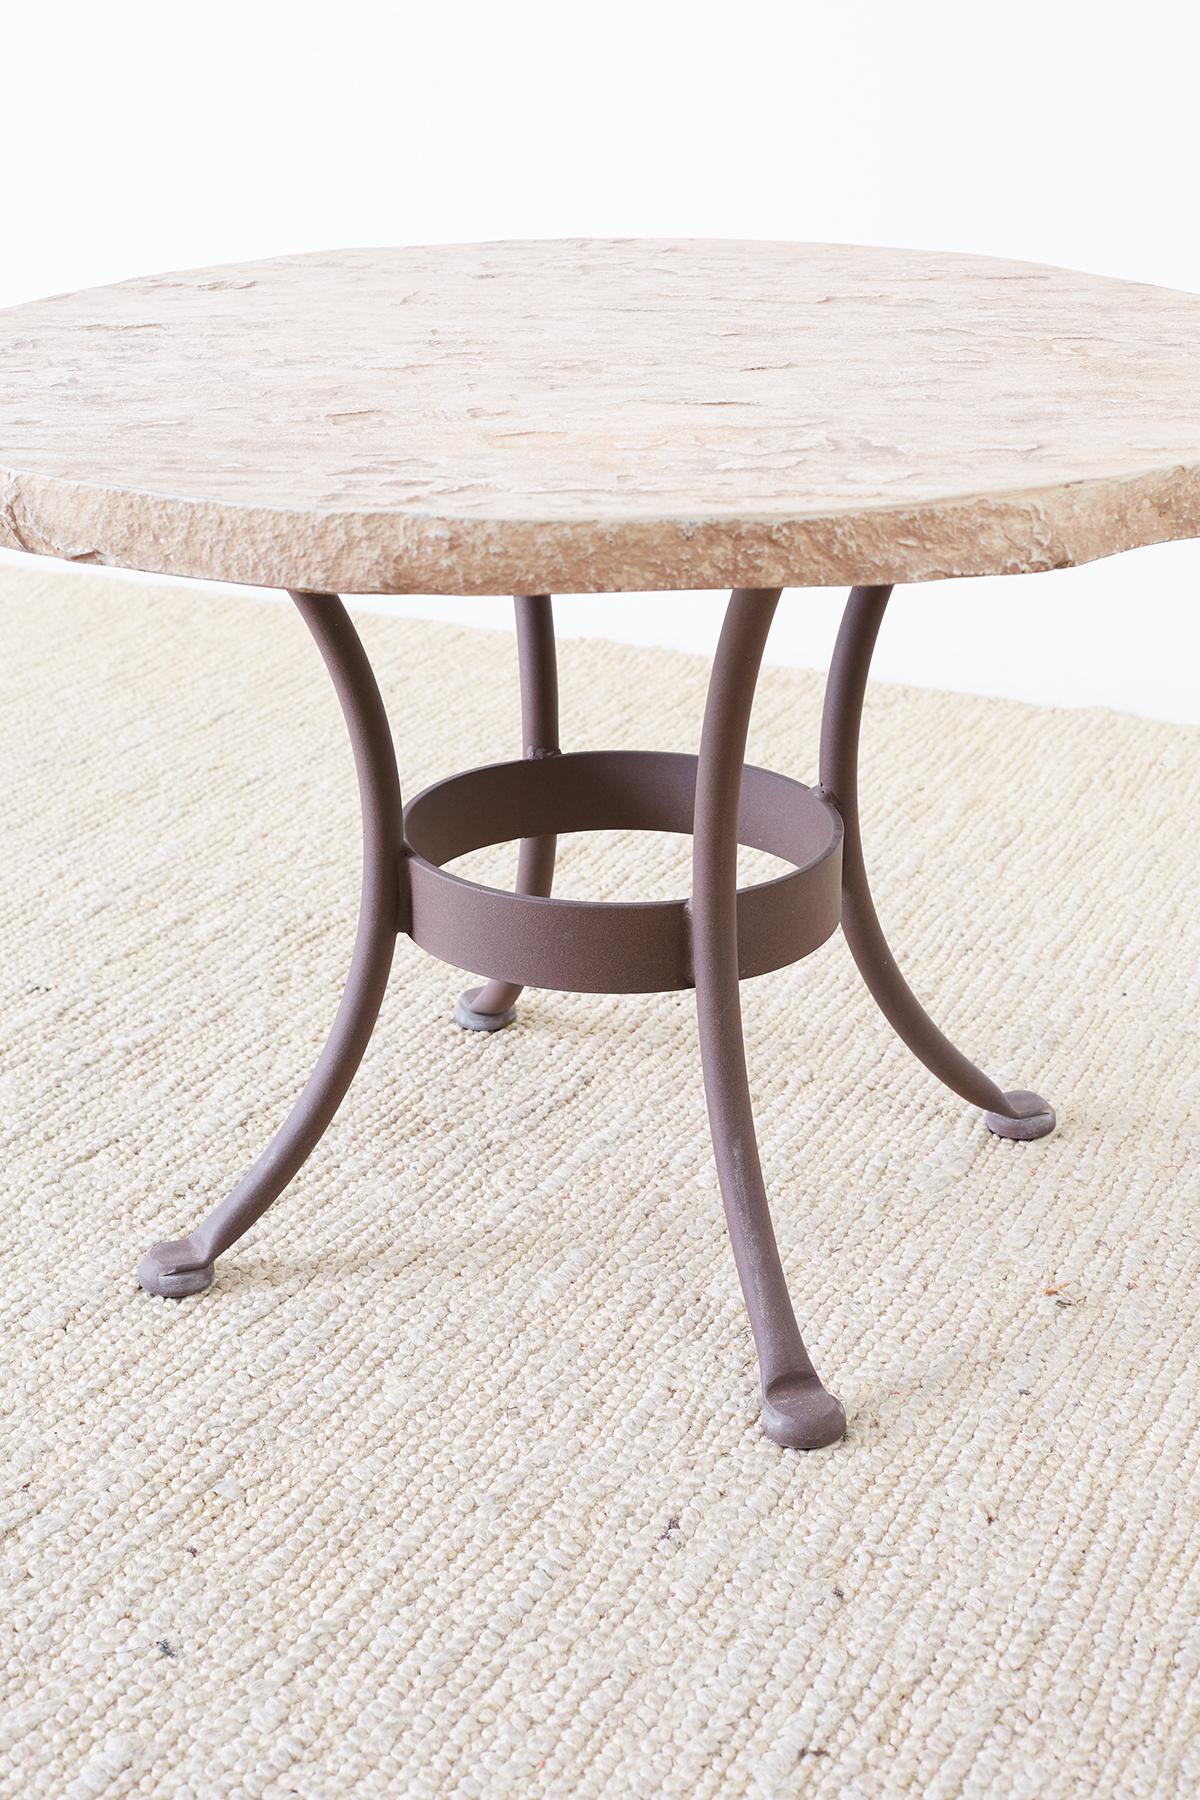 faux stone outdoor table